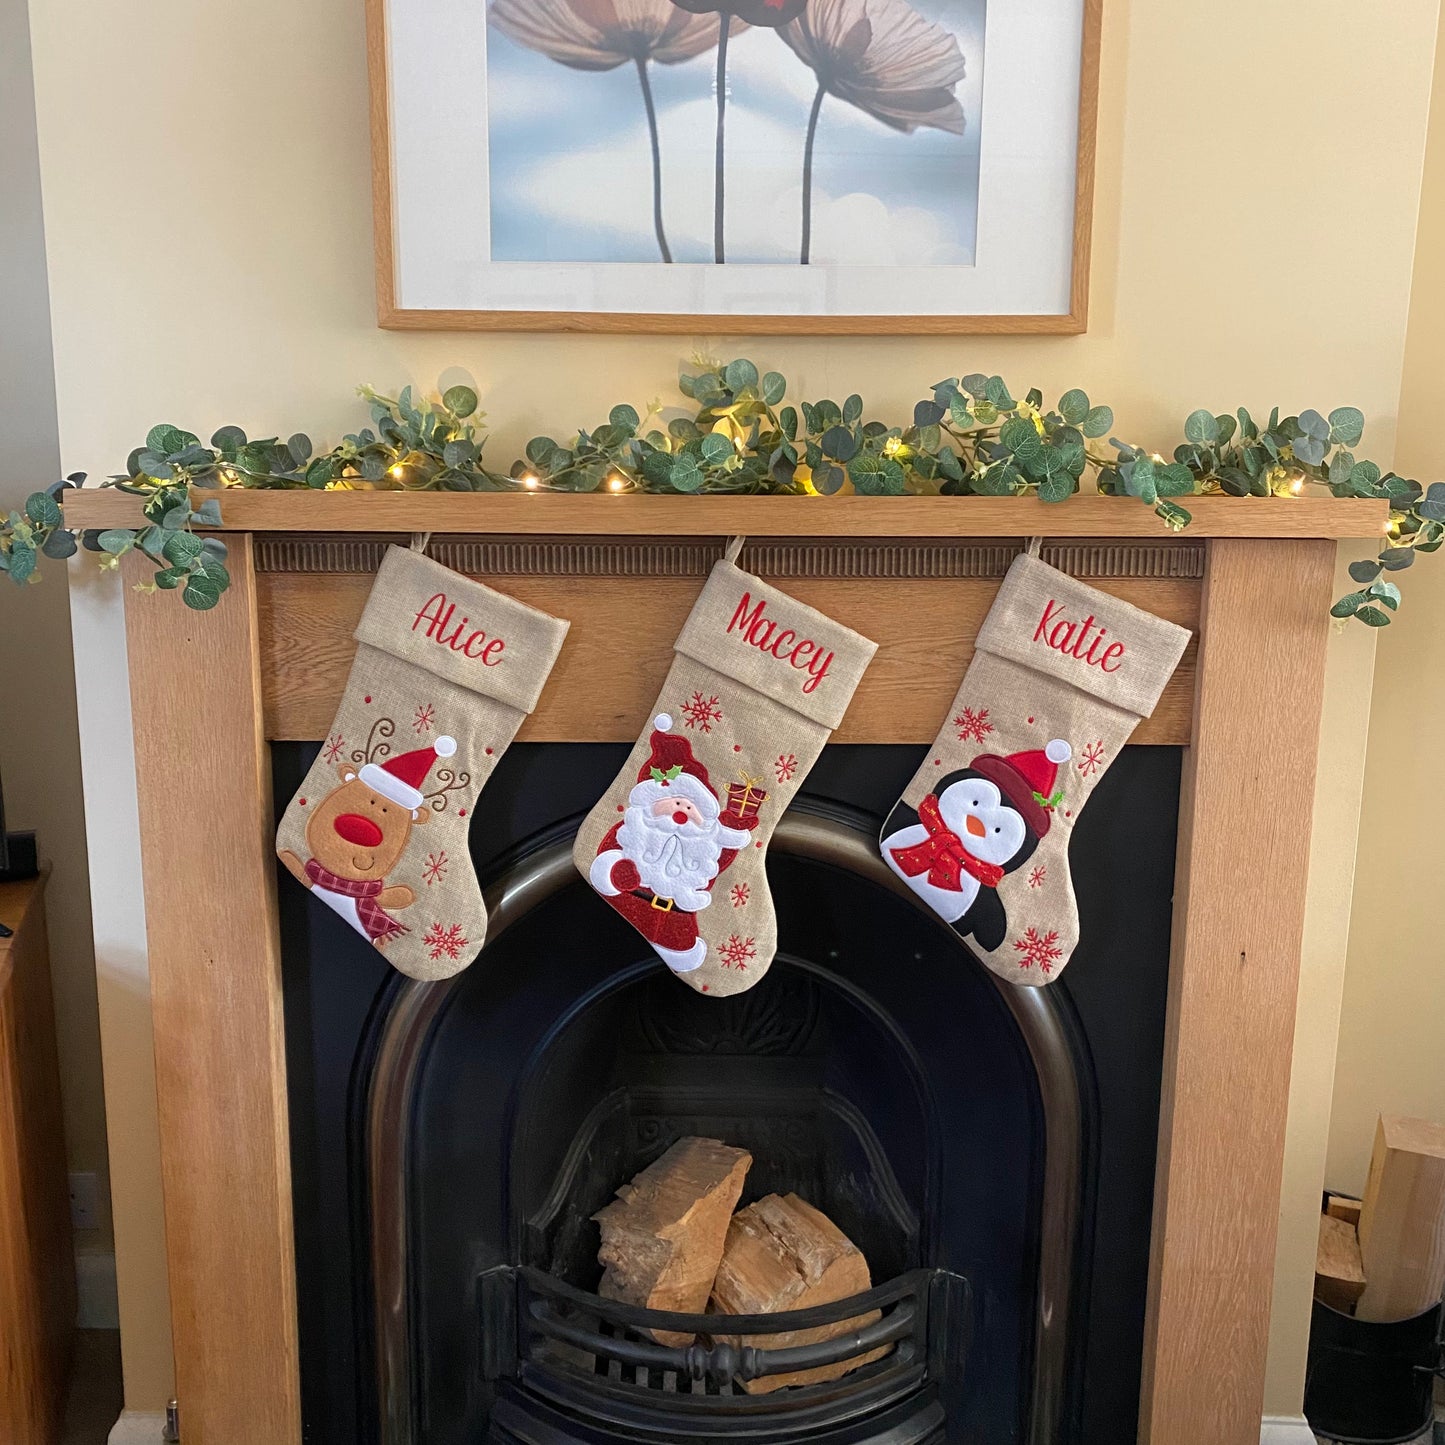 Personalised Embroidered Christmas Stocking